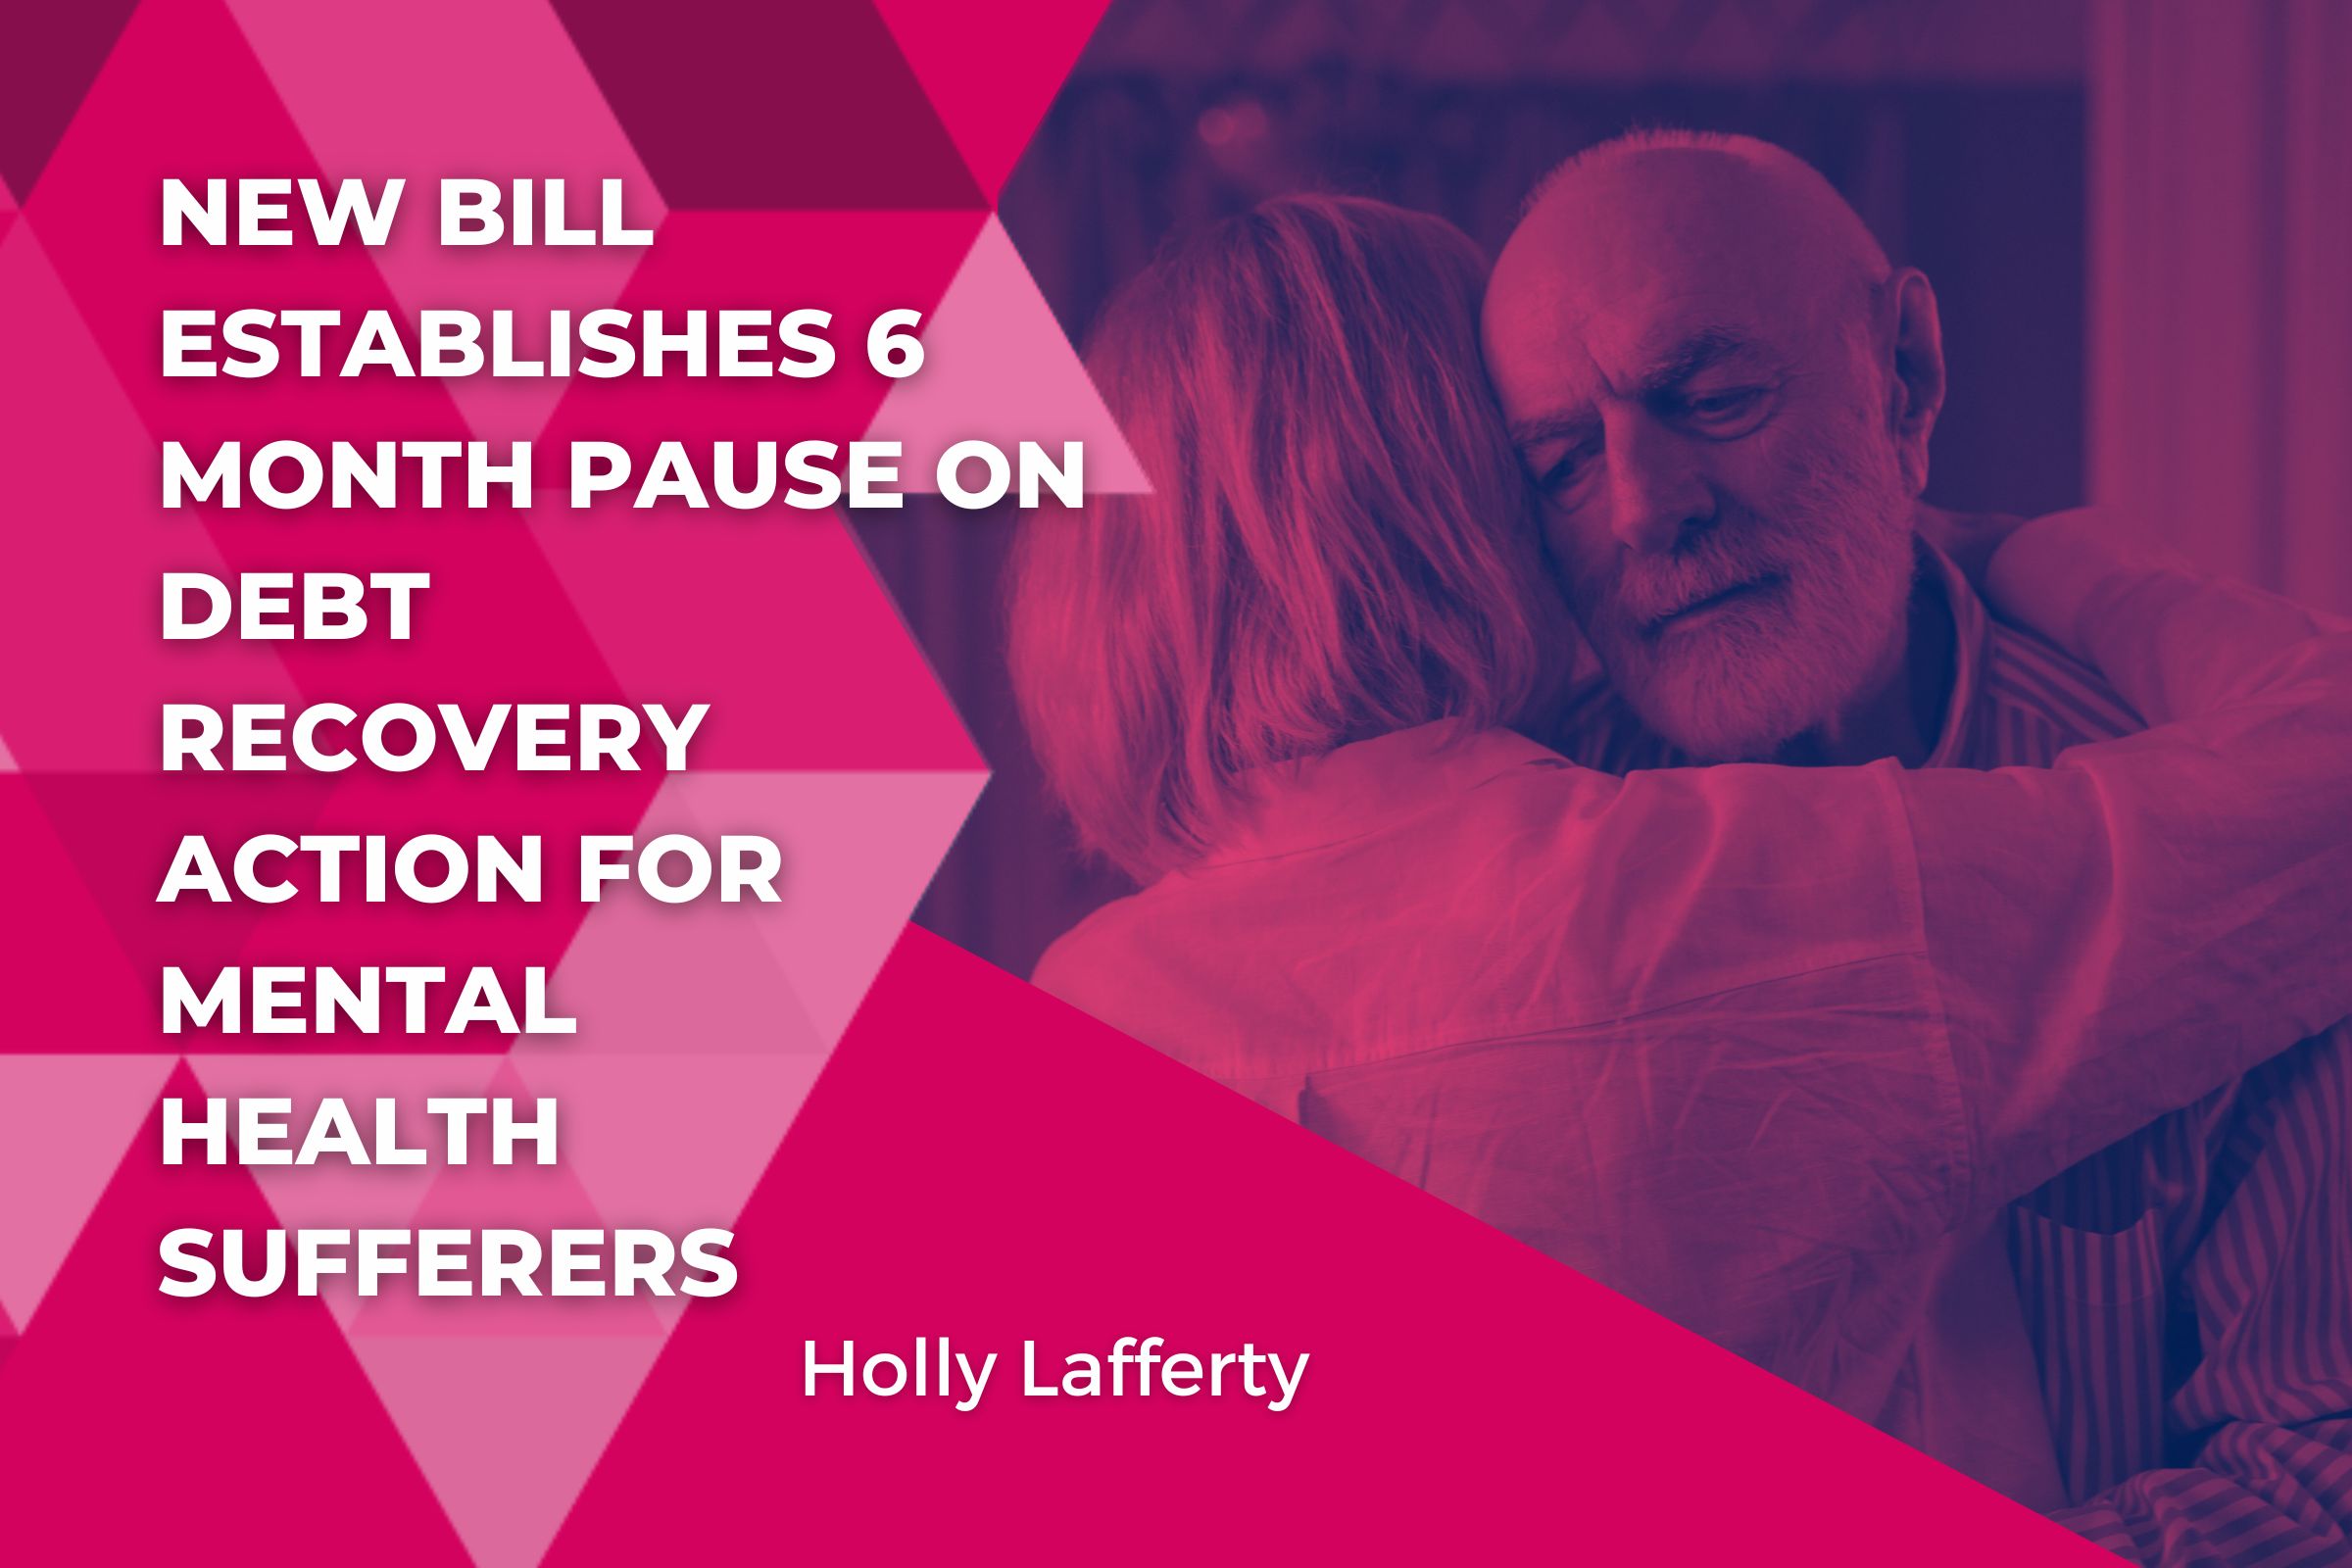 New Bill Establishes 6 Month Pause on Debt Recovery Action for Mental Health Sufferers